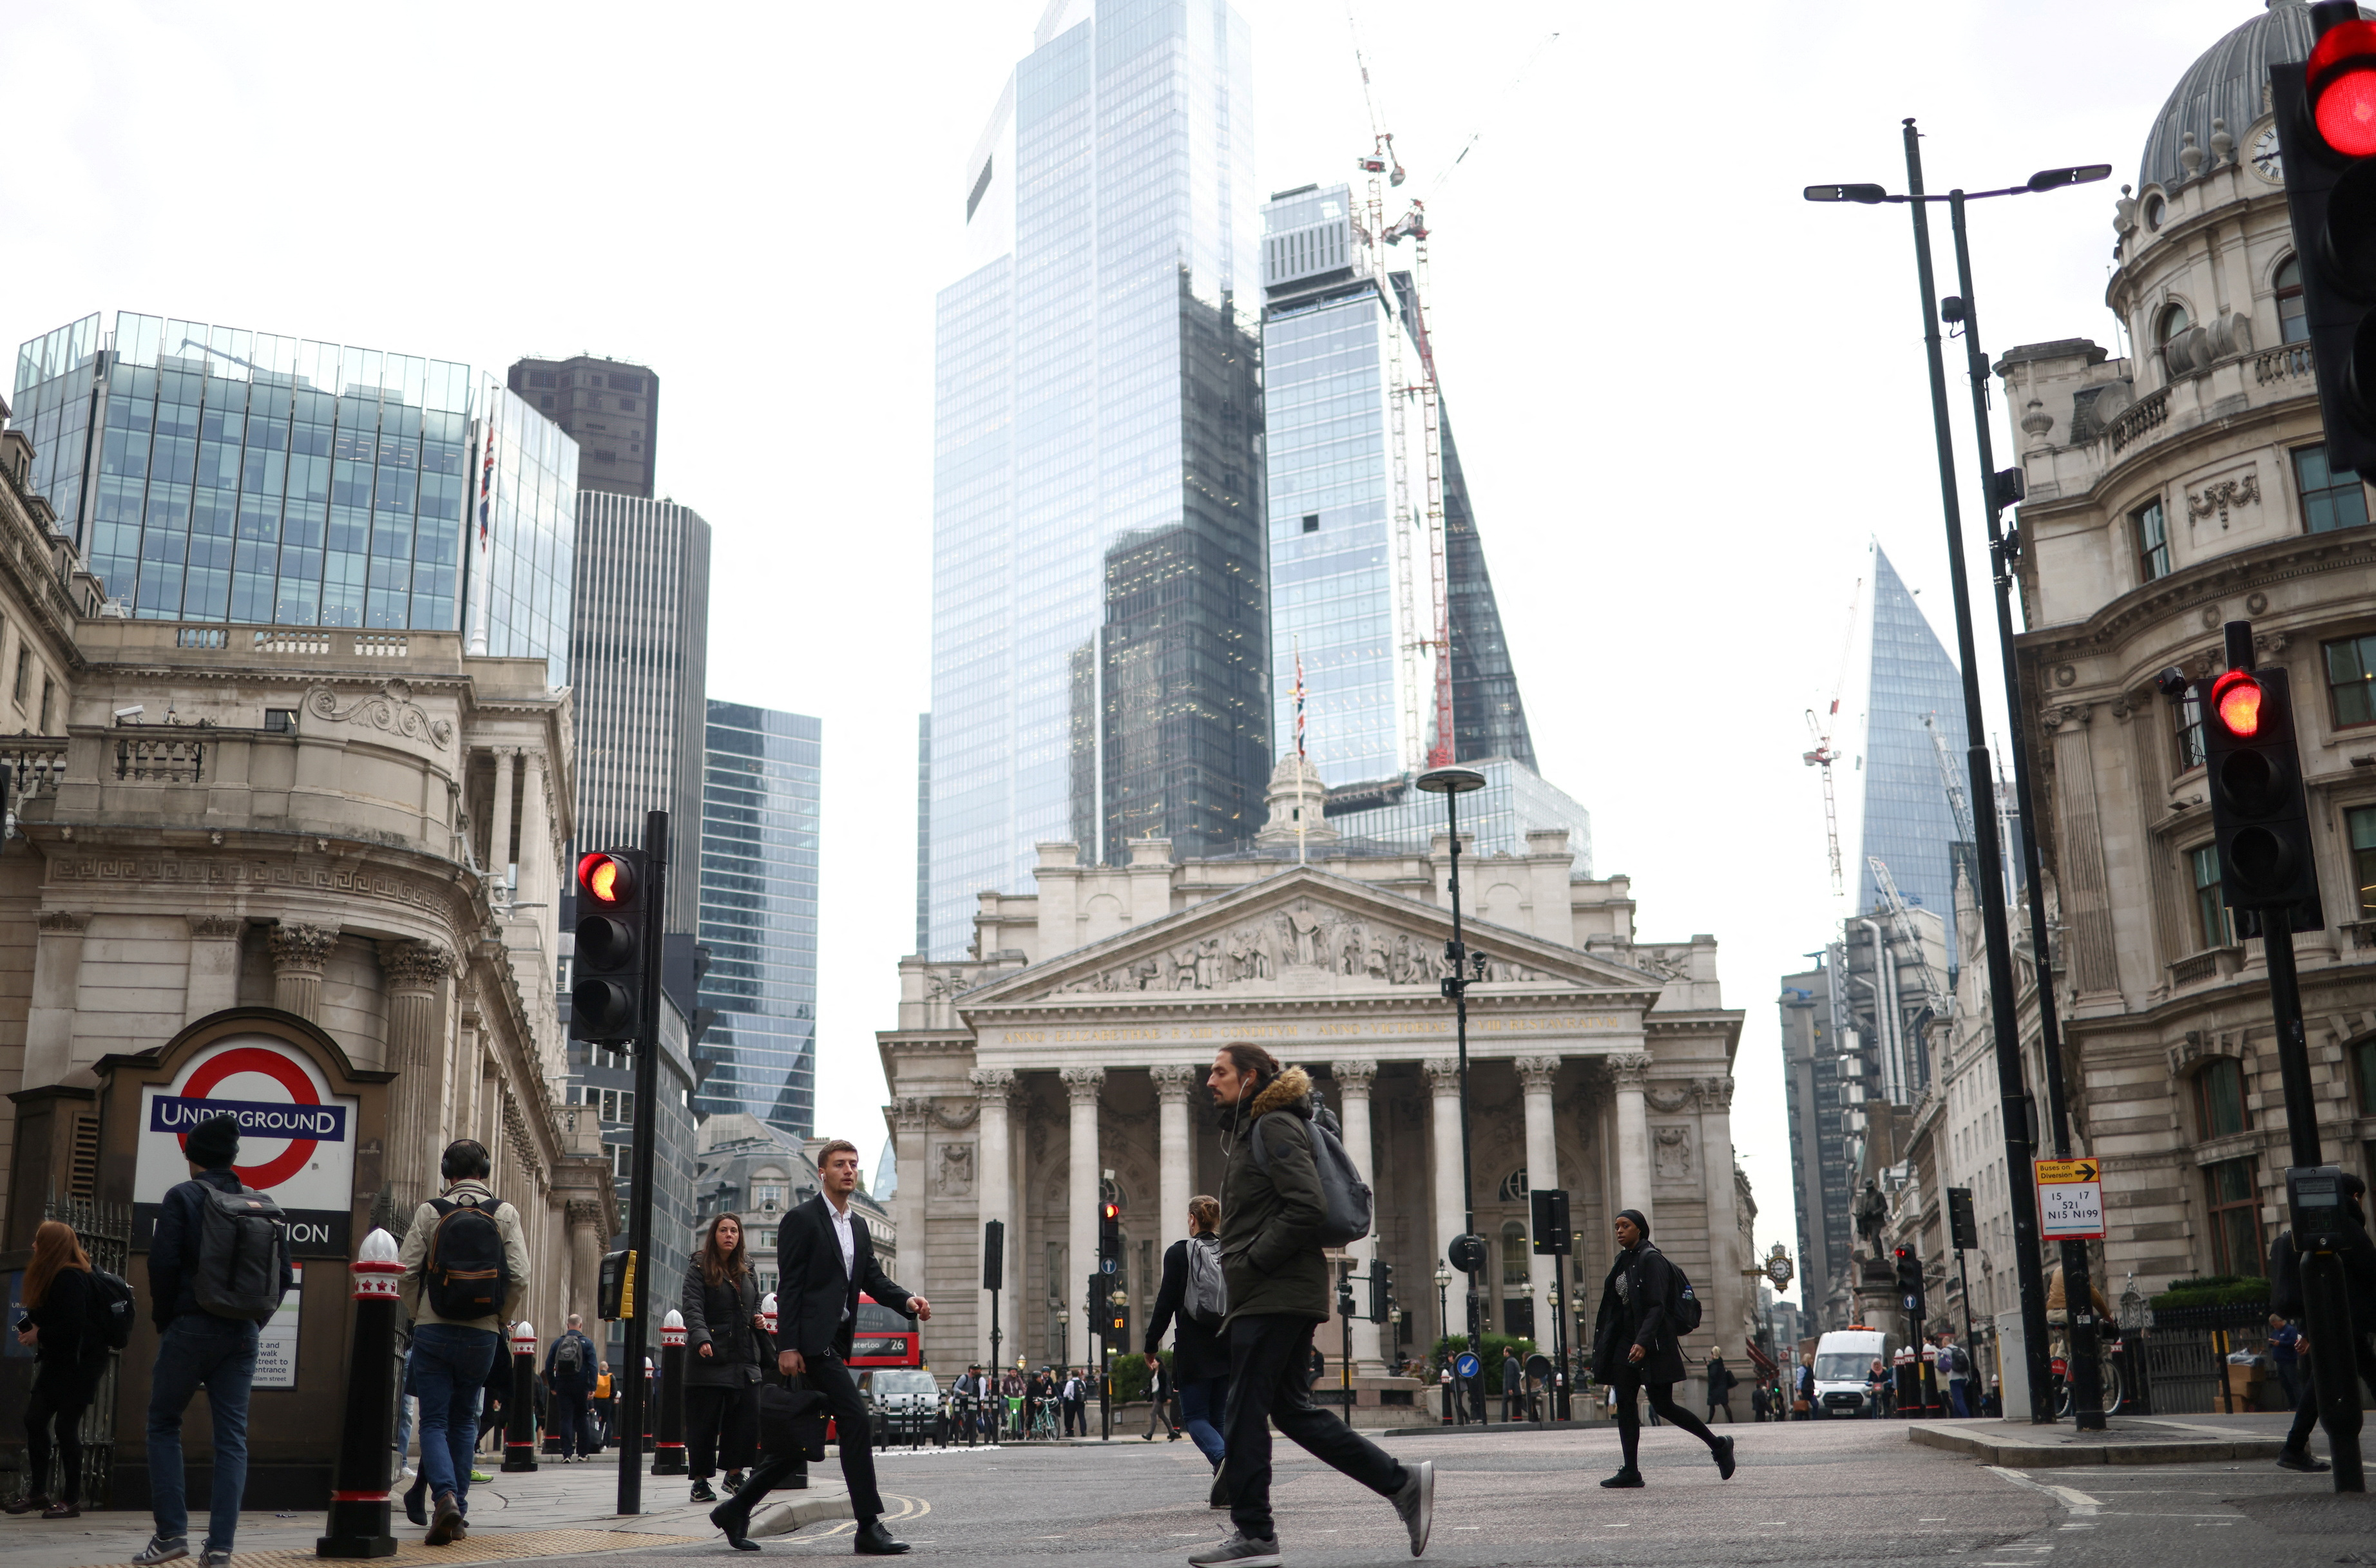 People walk through the City of London financial district during rush hour in London